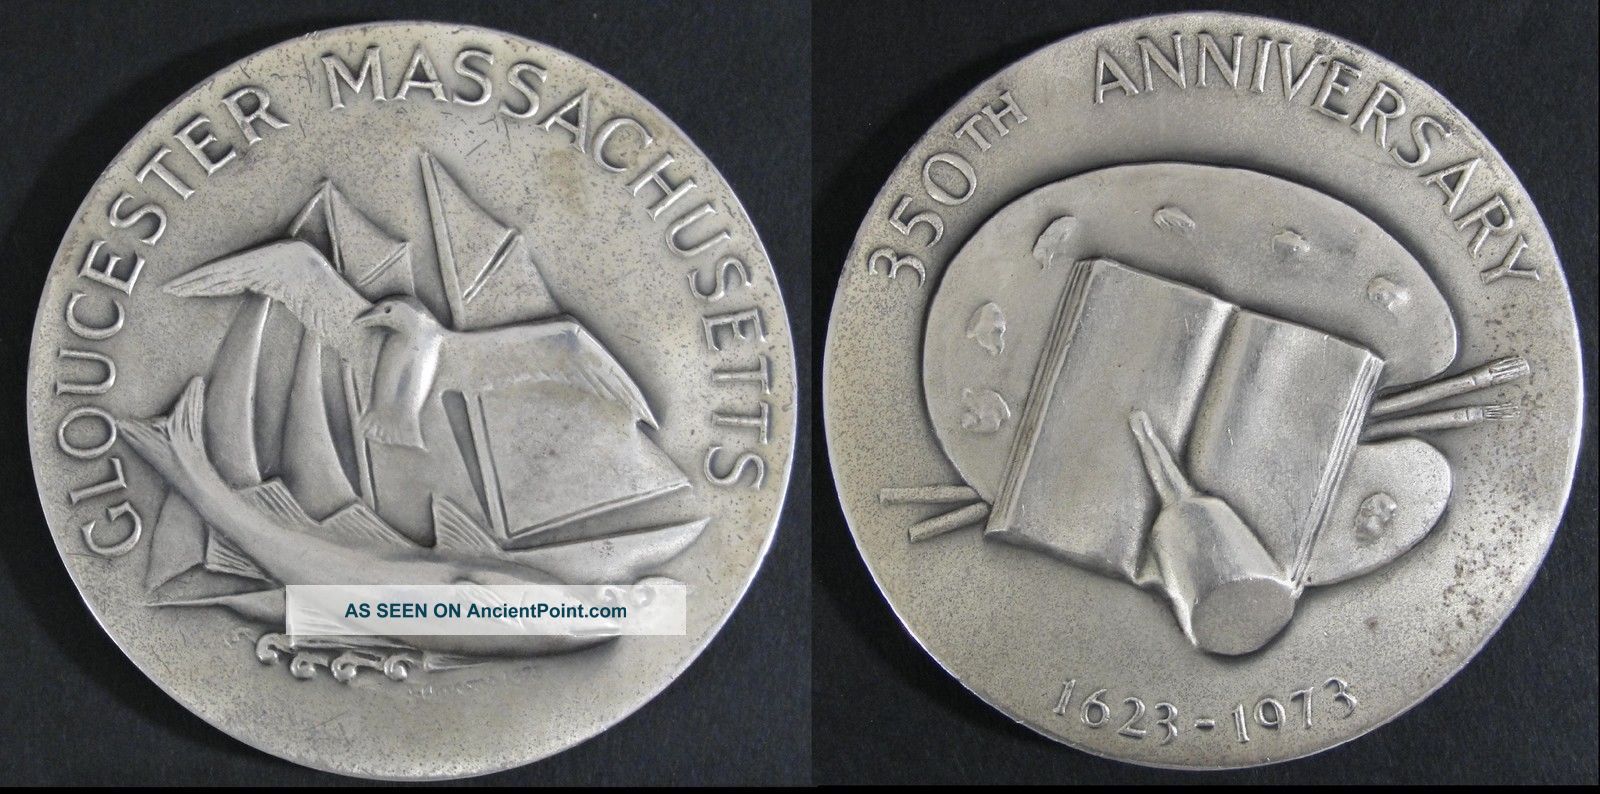 1973 Modernist George Aarons Massachusetts 350 Anniversary.  999 Silver Medallion Other Antique Sterling Silver photo